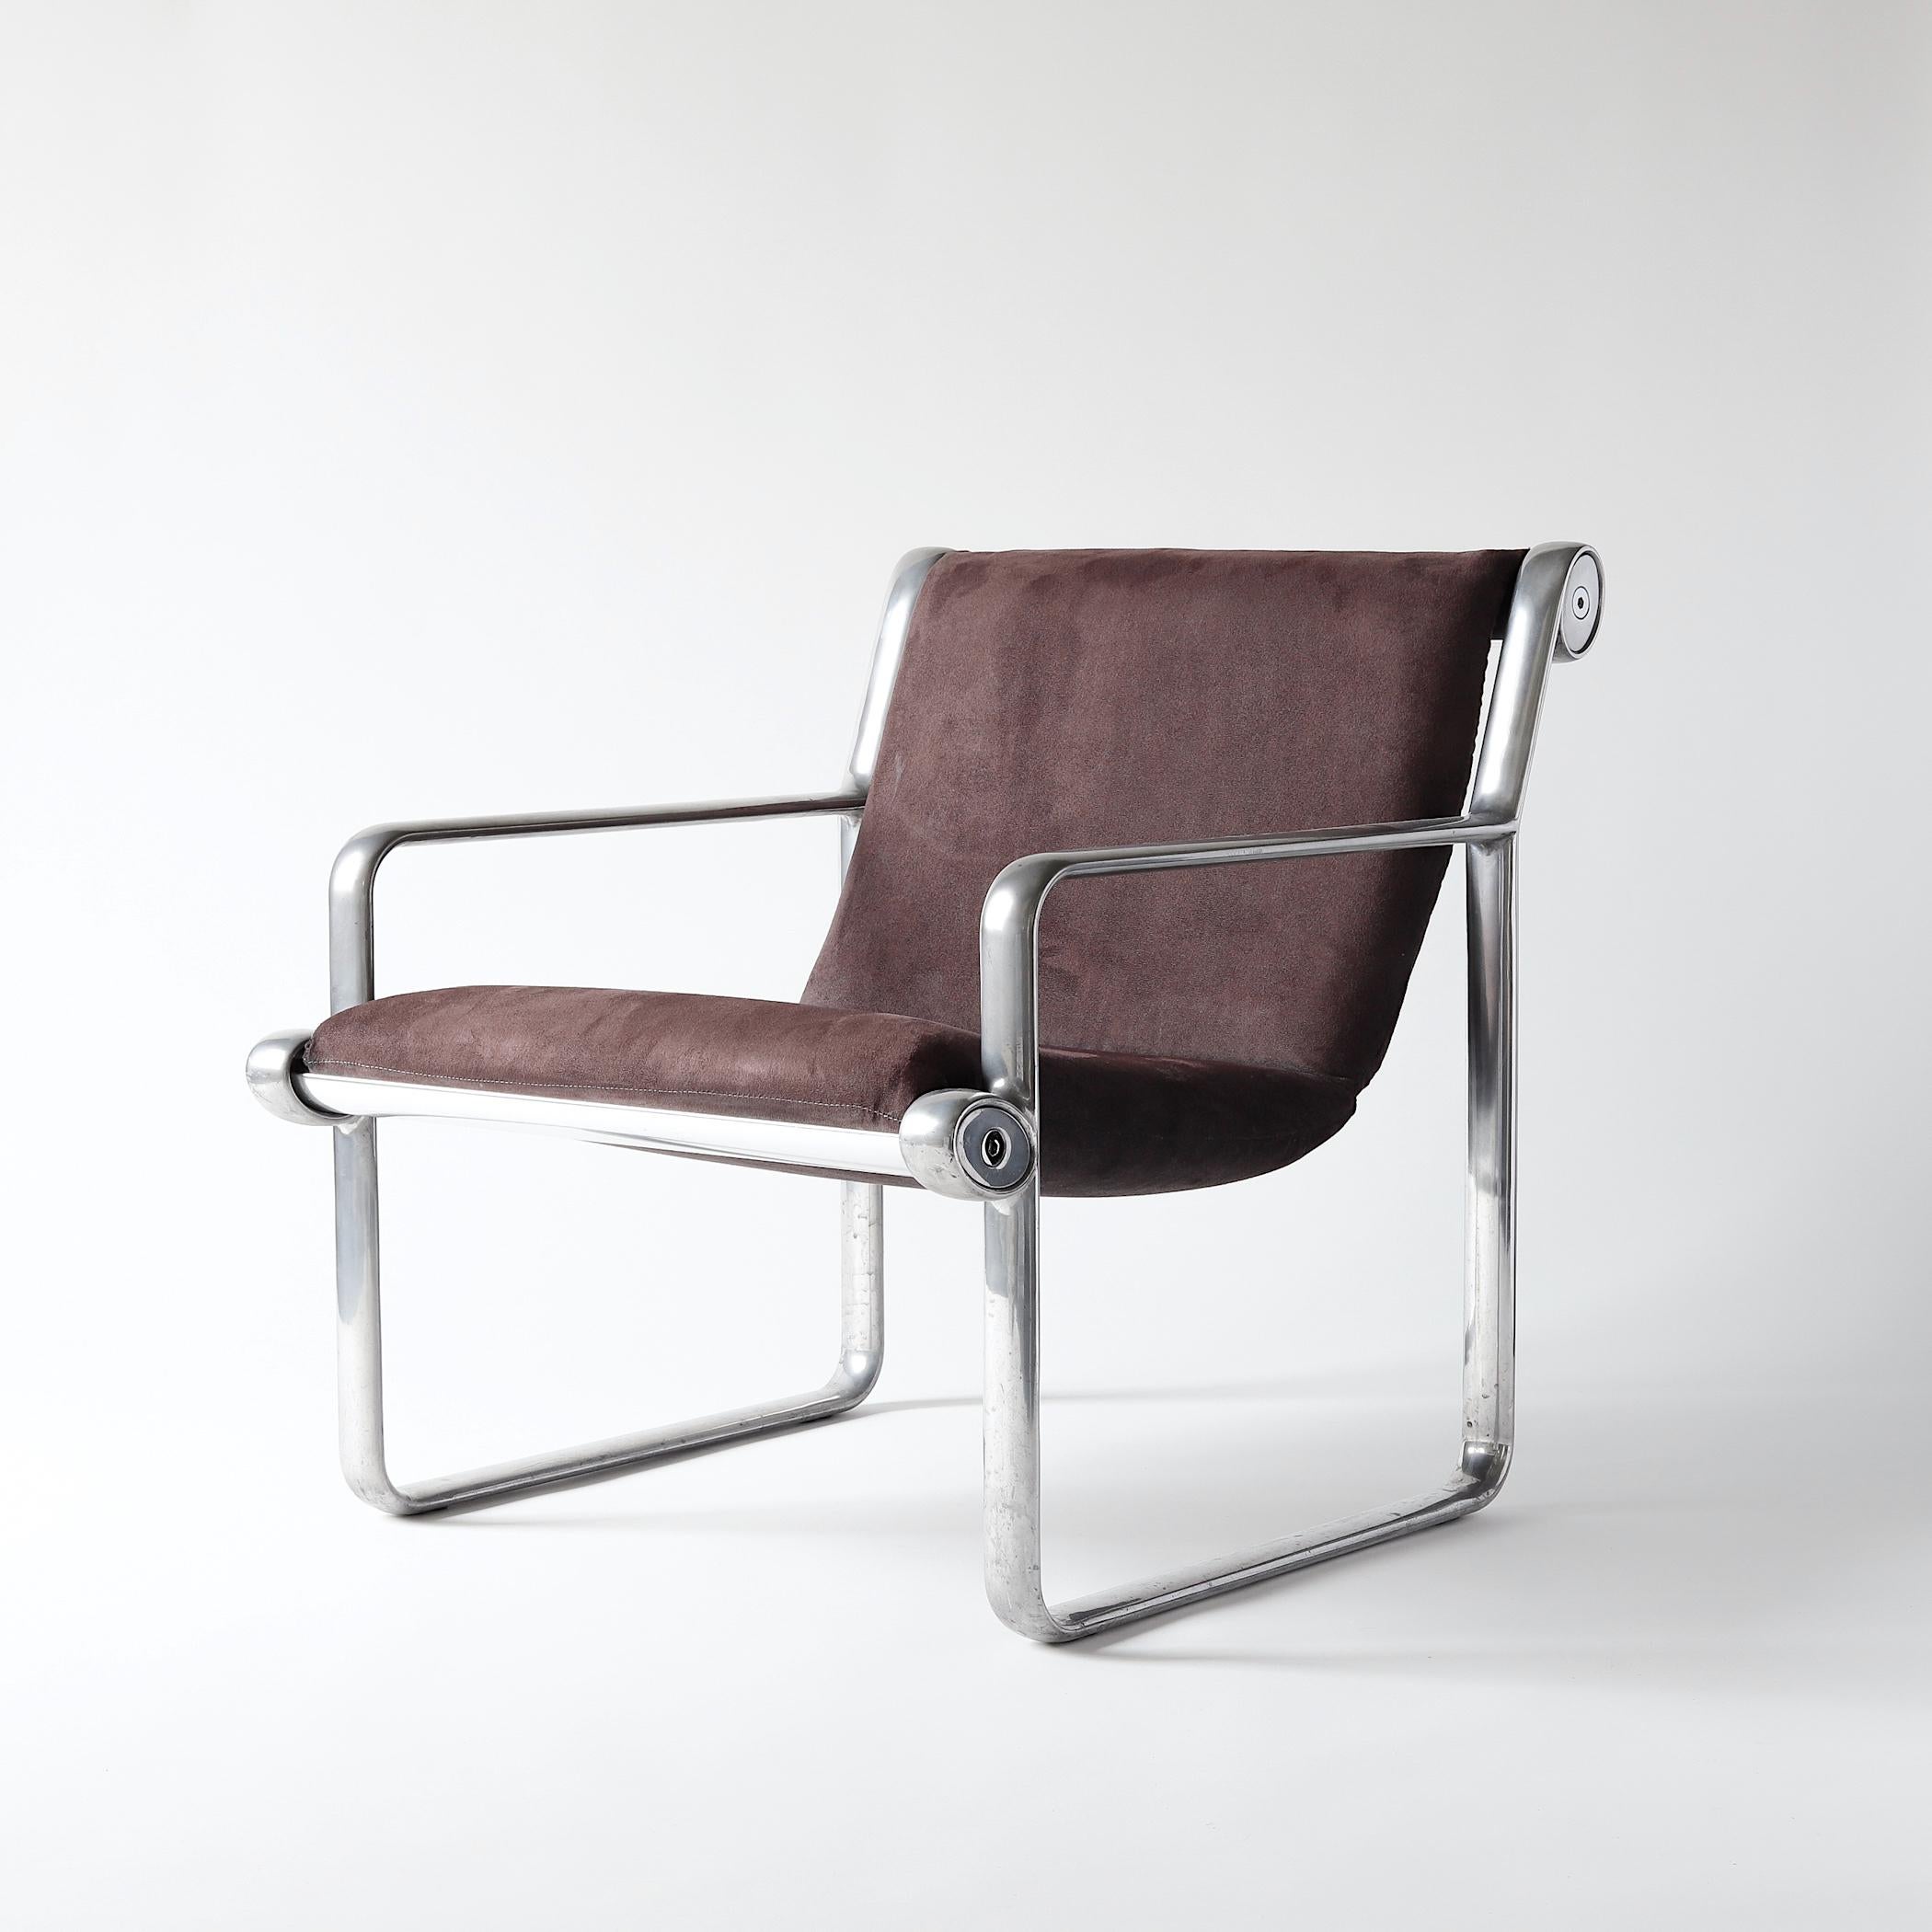 Pair of aluminum open armchairs with purple microsuede upholstery designed by Bruce Hannah and Andrew Morrison for Knoll in 1971. The design team worked together at Knoll throughout the 1970s and won numerous design awards. 

Like Marc Newson's